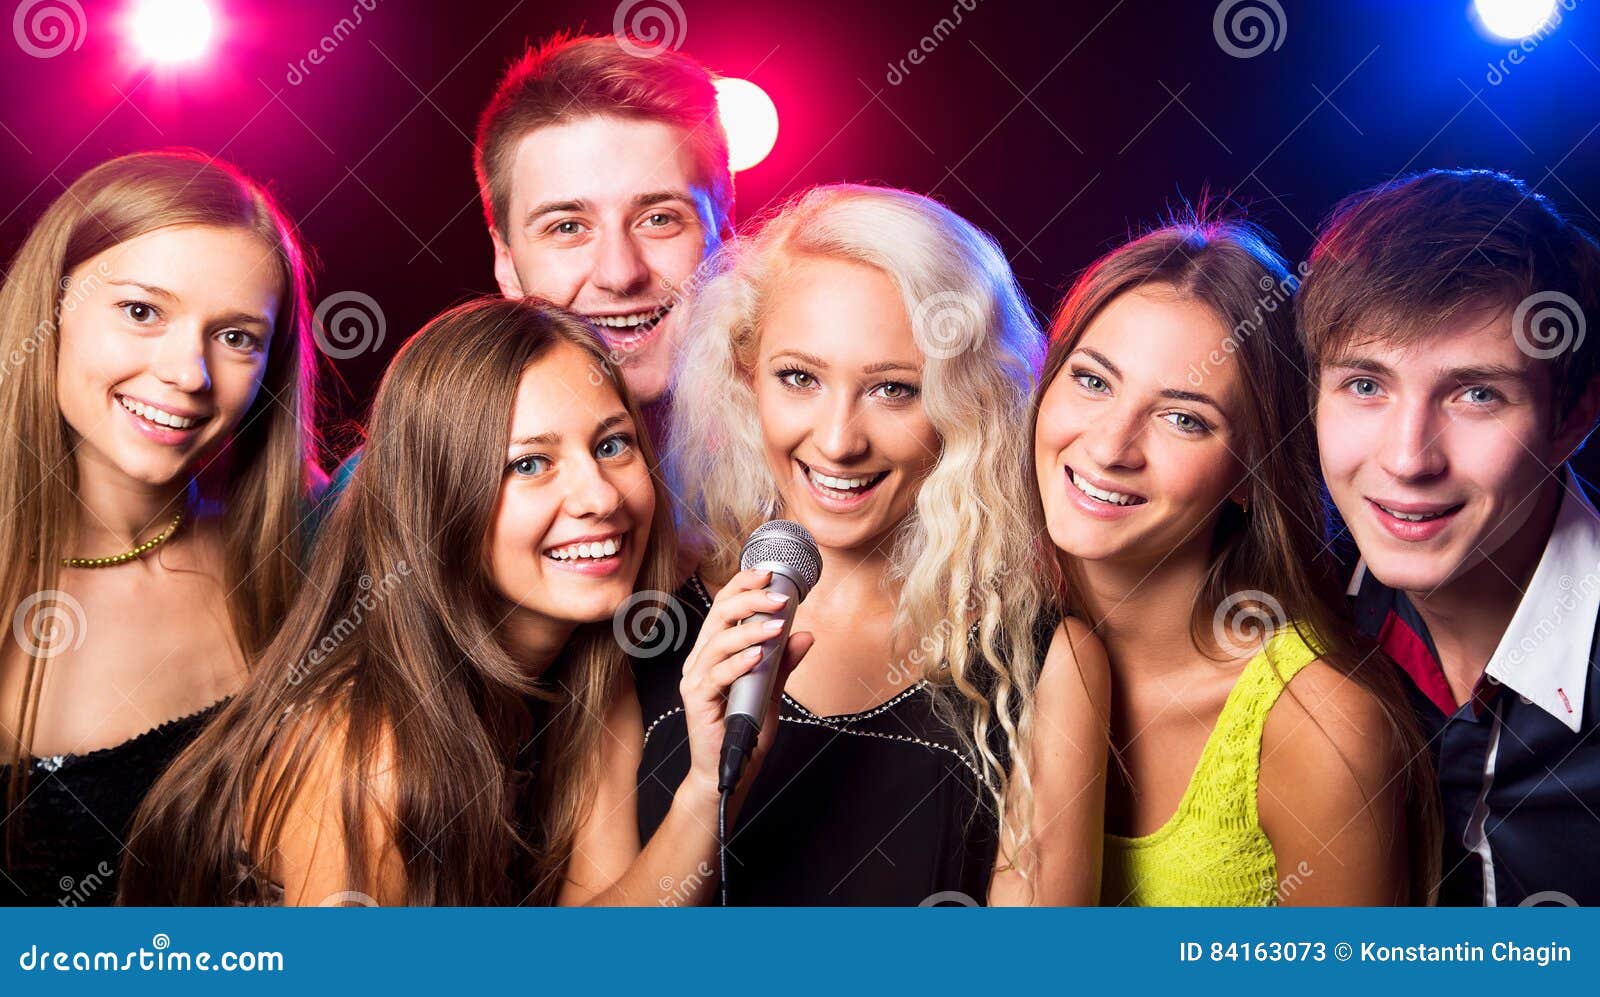 Young People Singing at Party Stock Image - Image of birthday, holidays ...